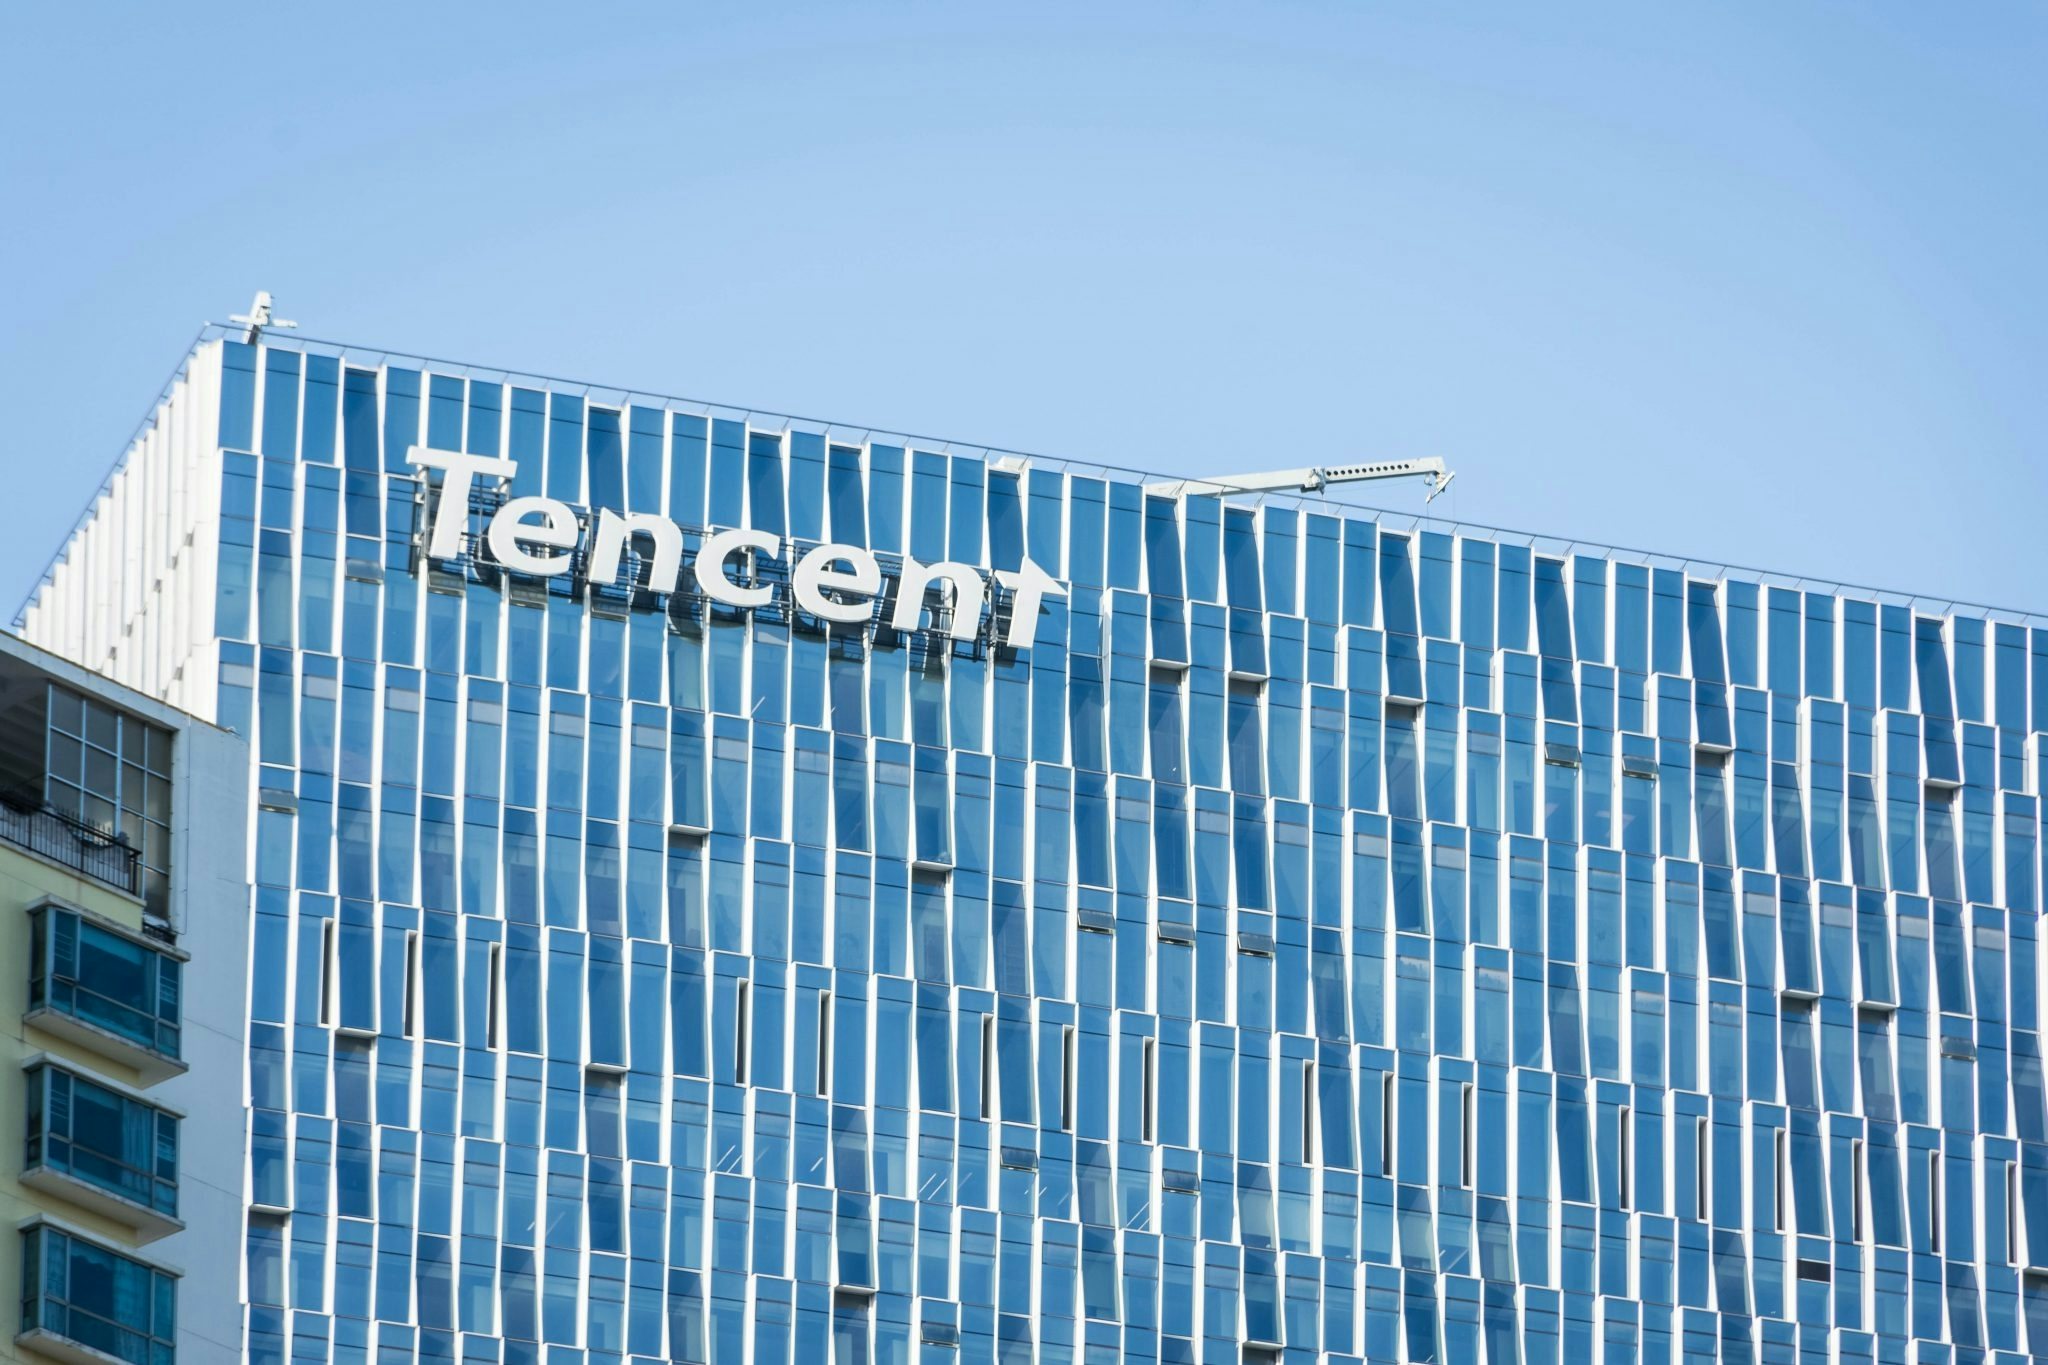 Tencent topped the list for the fourth consecutive year. Photo: Shutterstock